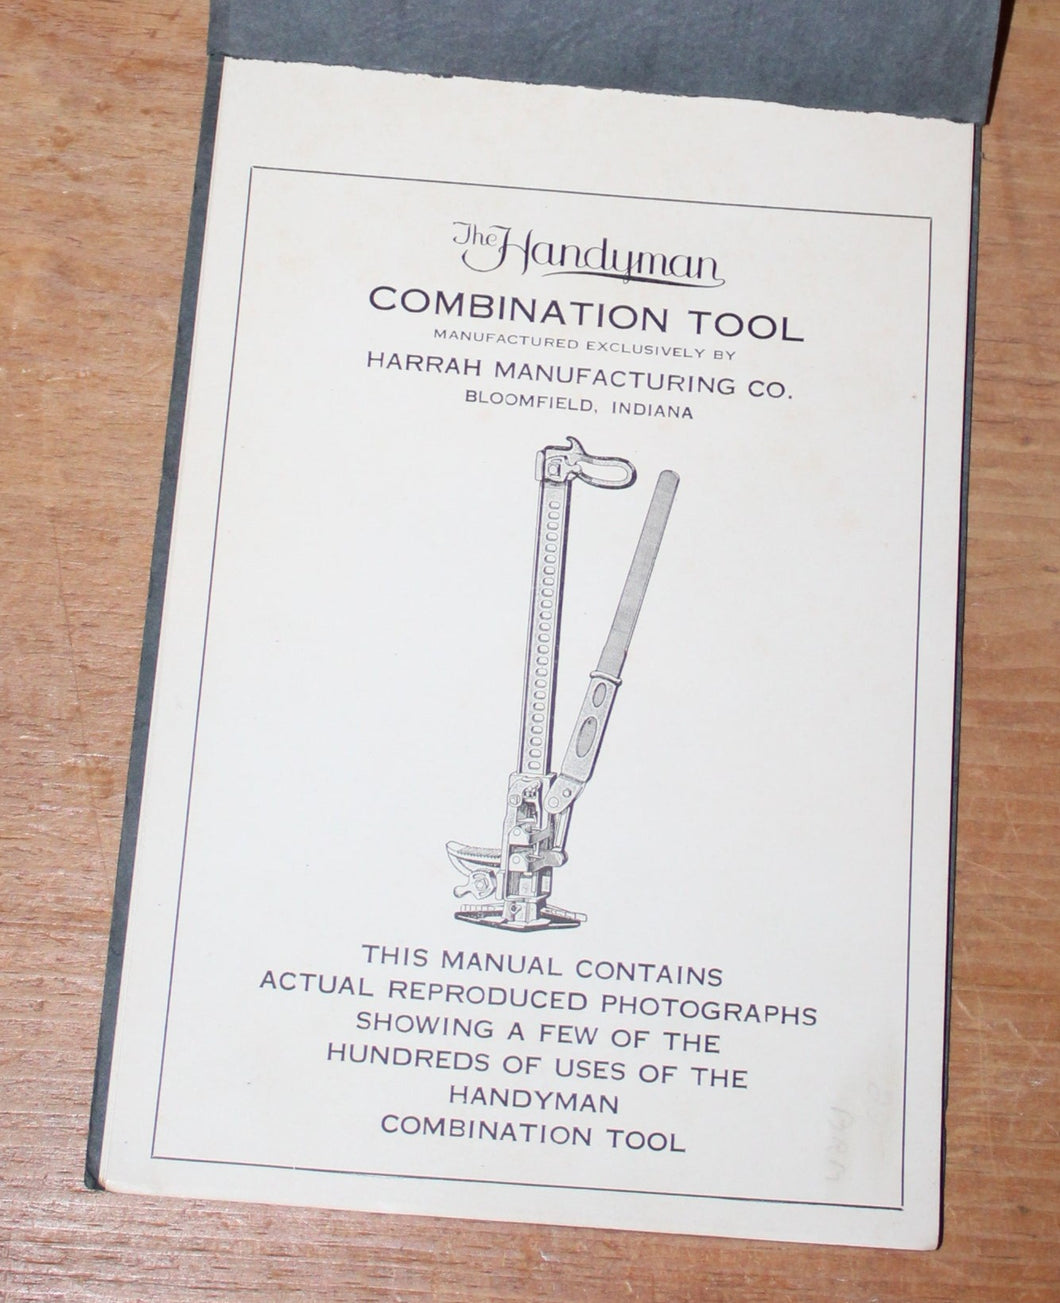 Rare - The Handyman Combination Tool Manual, Photographs Of Uses For Tool